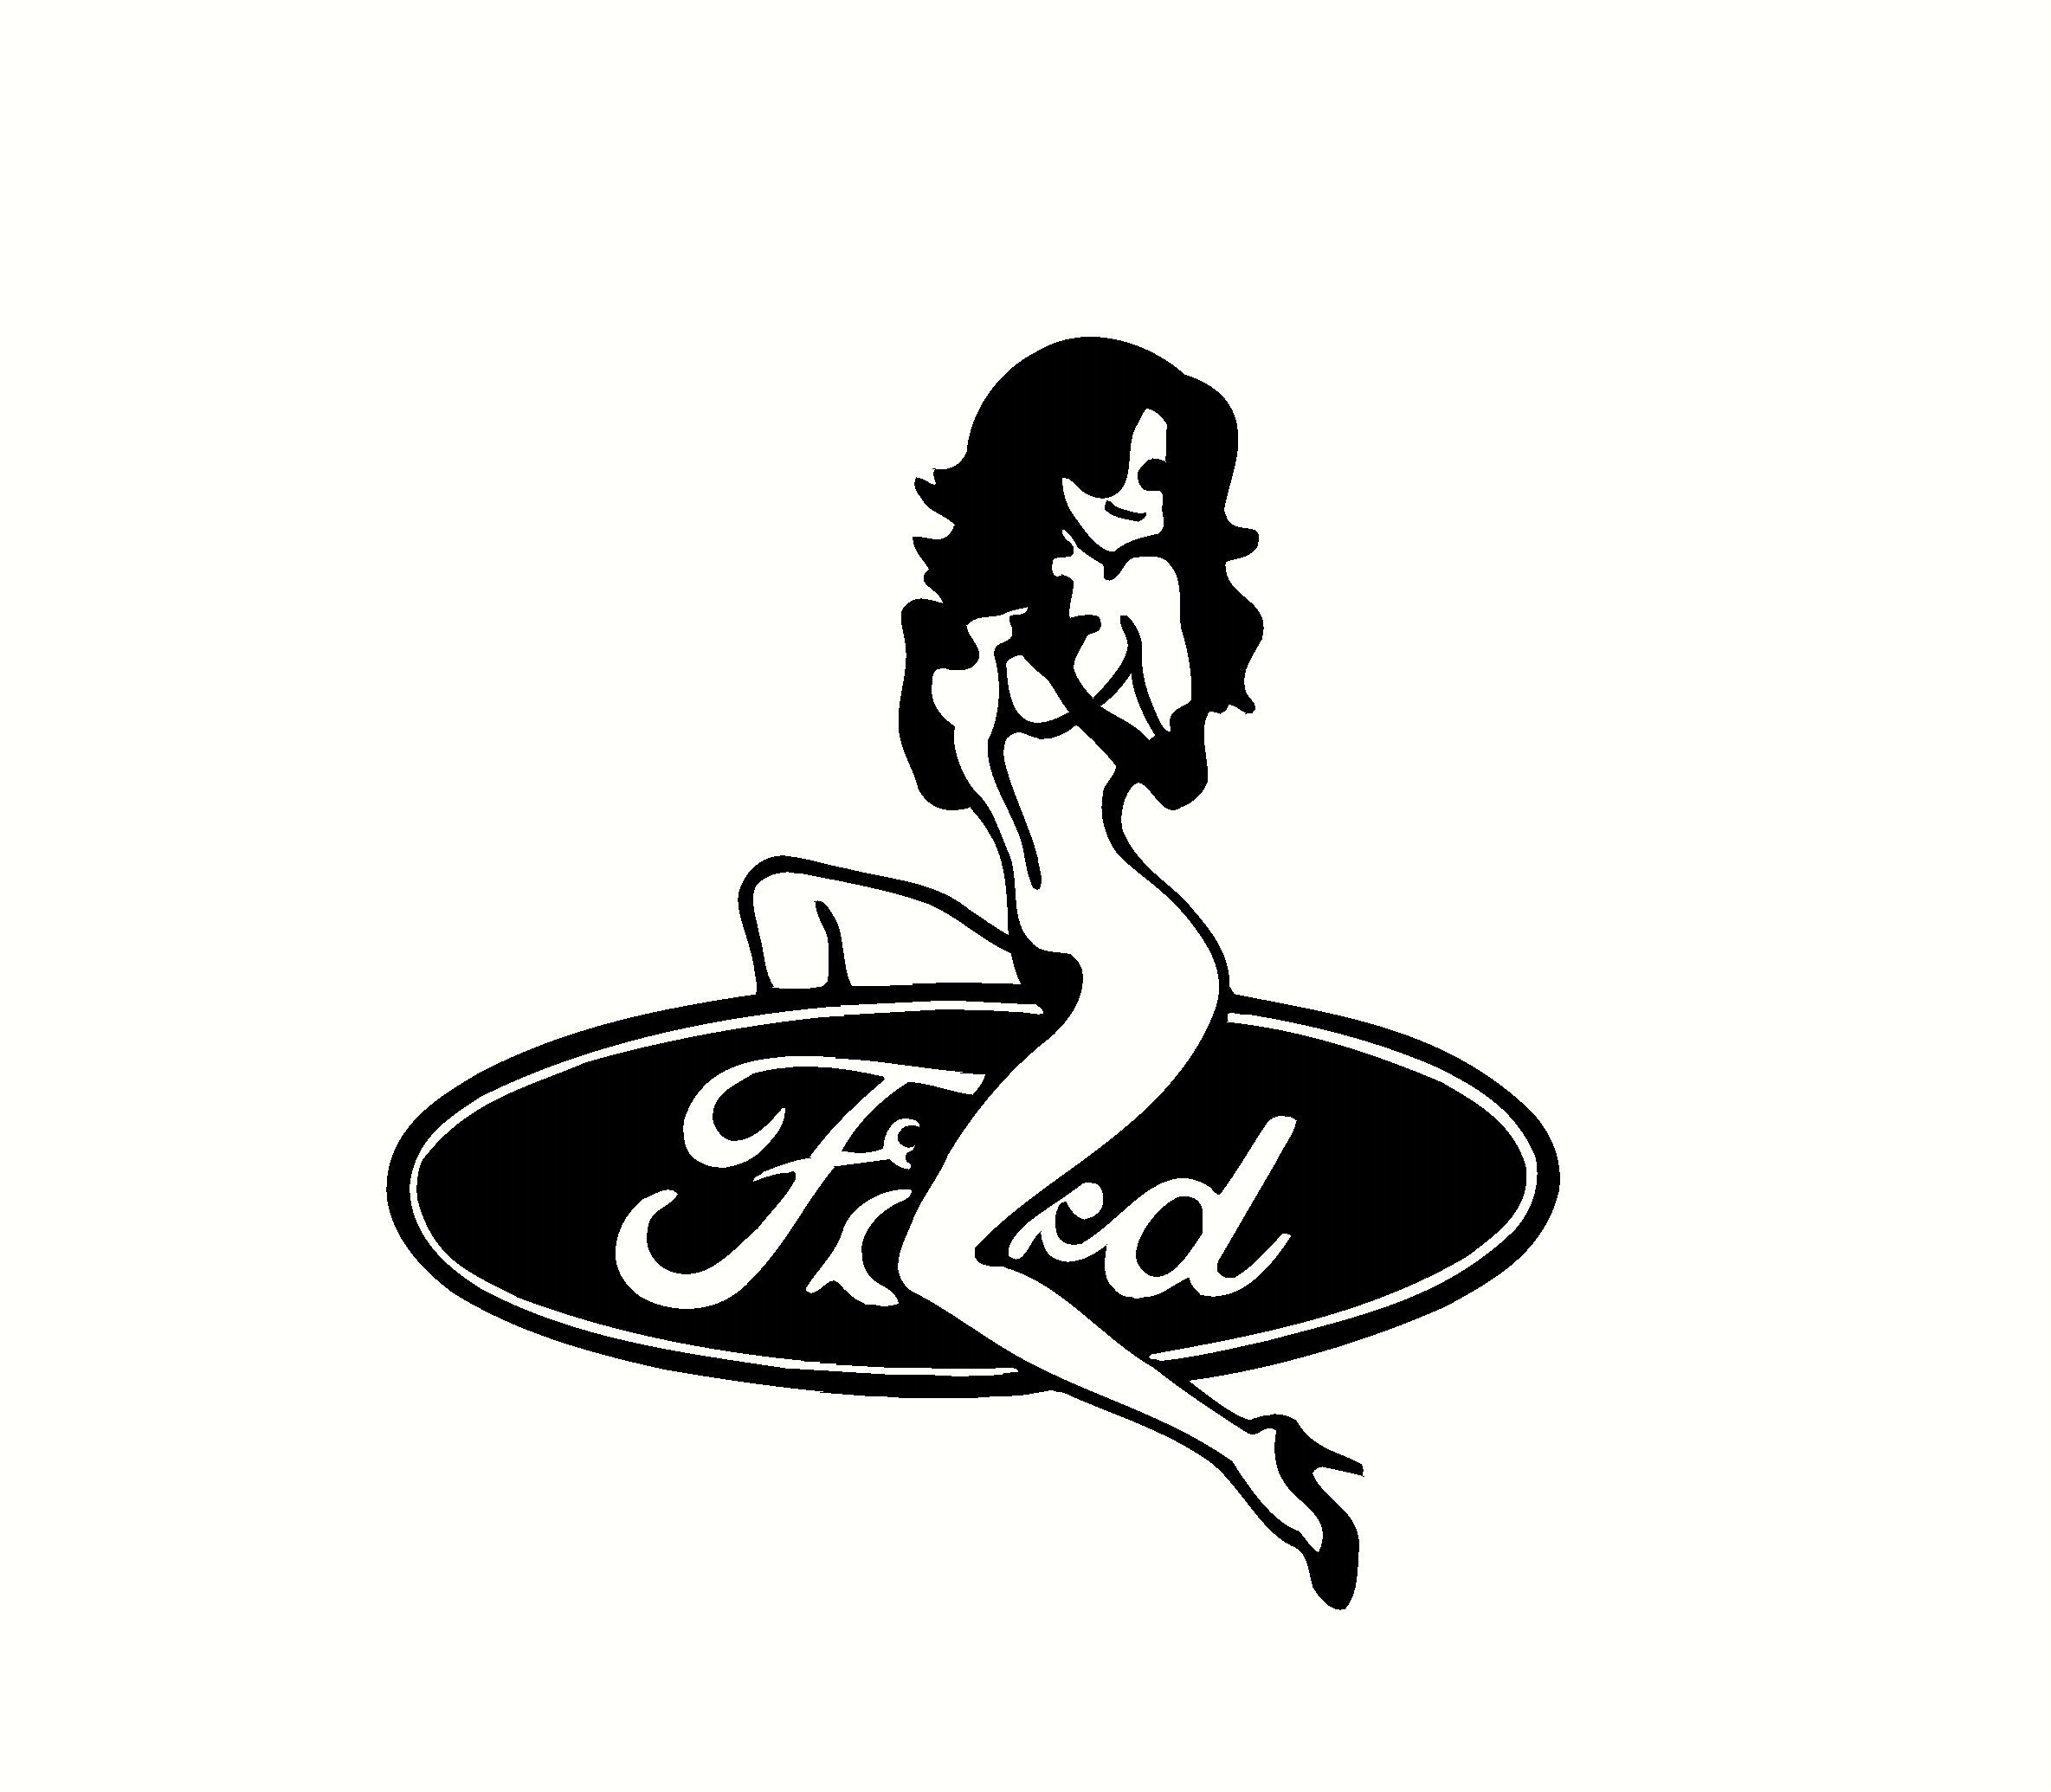 Ford Makes Her Clothes Fall Off Decal Sticker